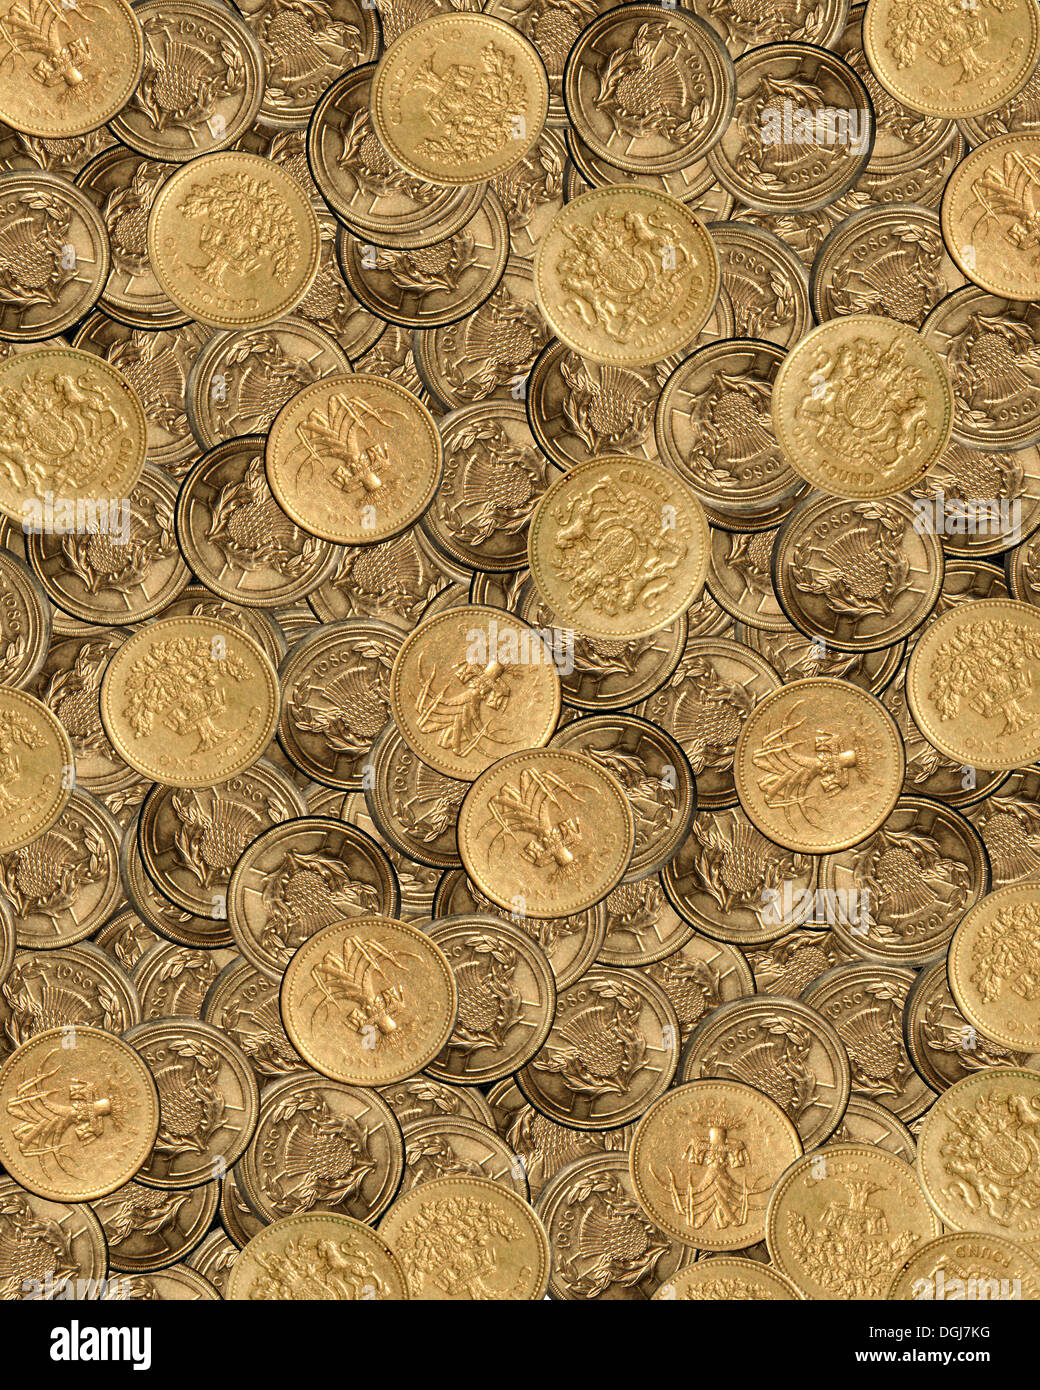 A Pile of One Pound Coins. Stock Photo